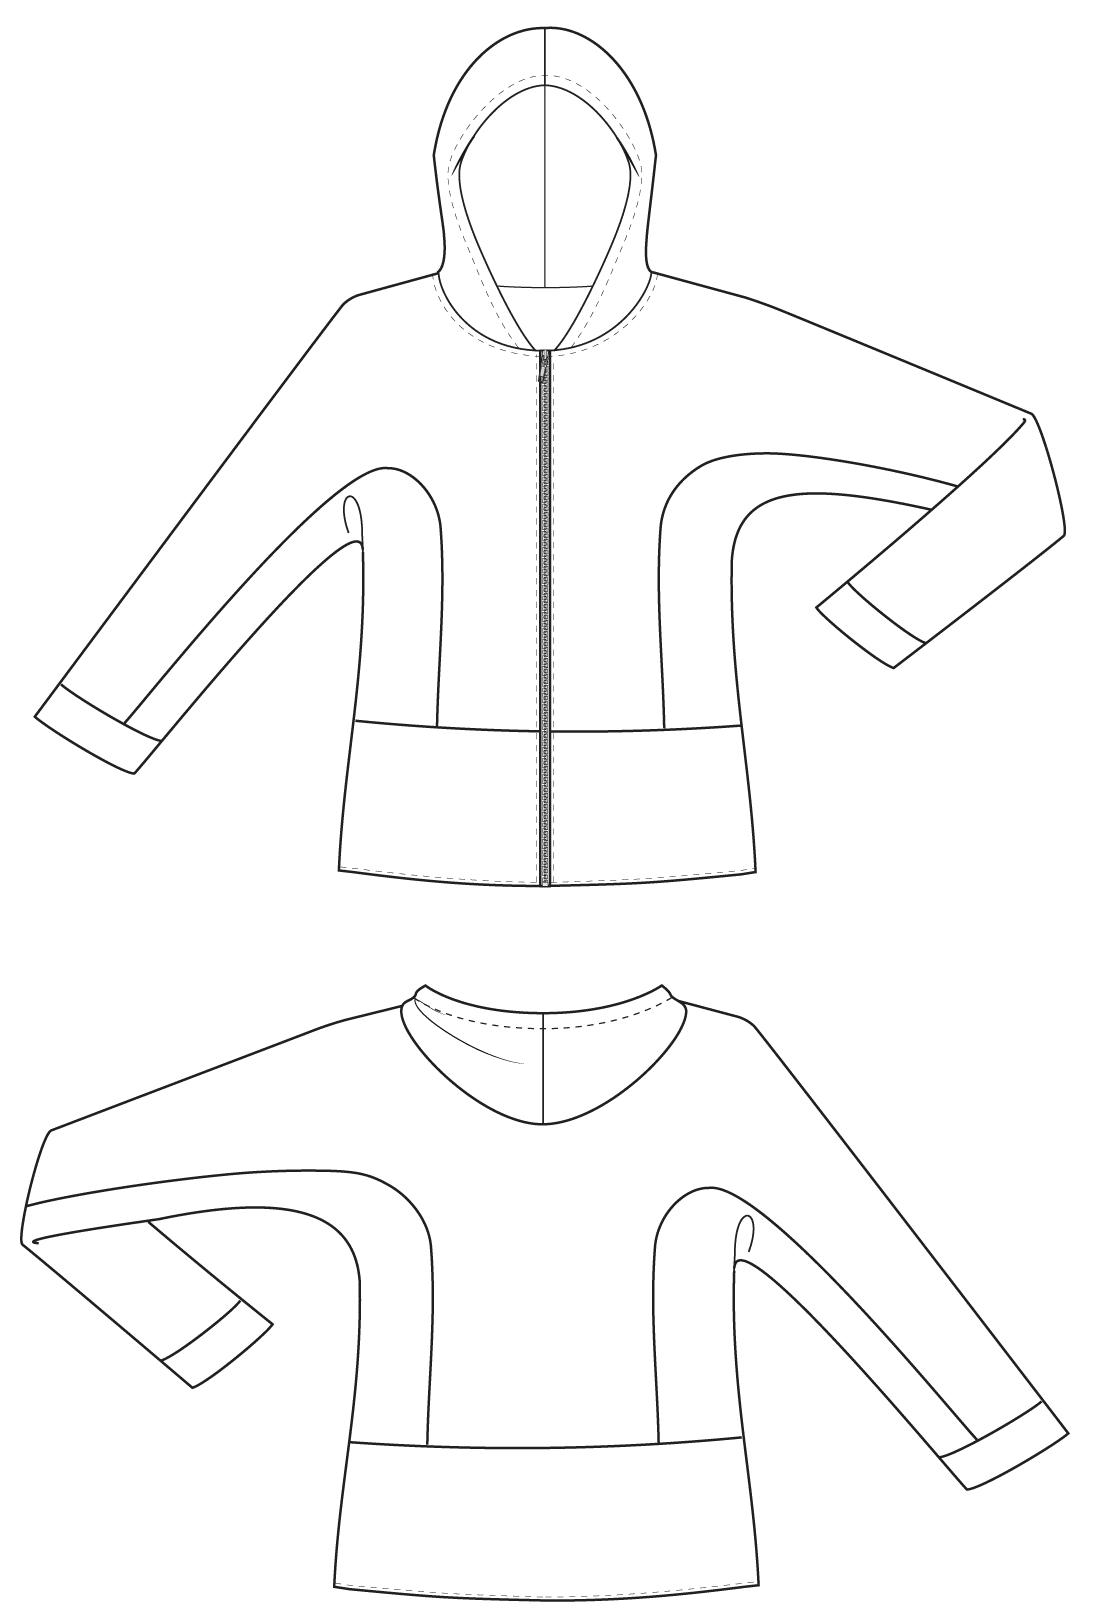 Enlarge a Pattern for a Jacket for Kids